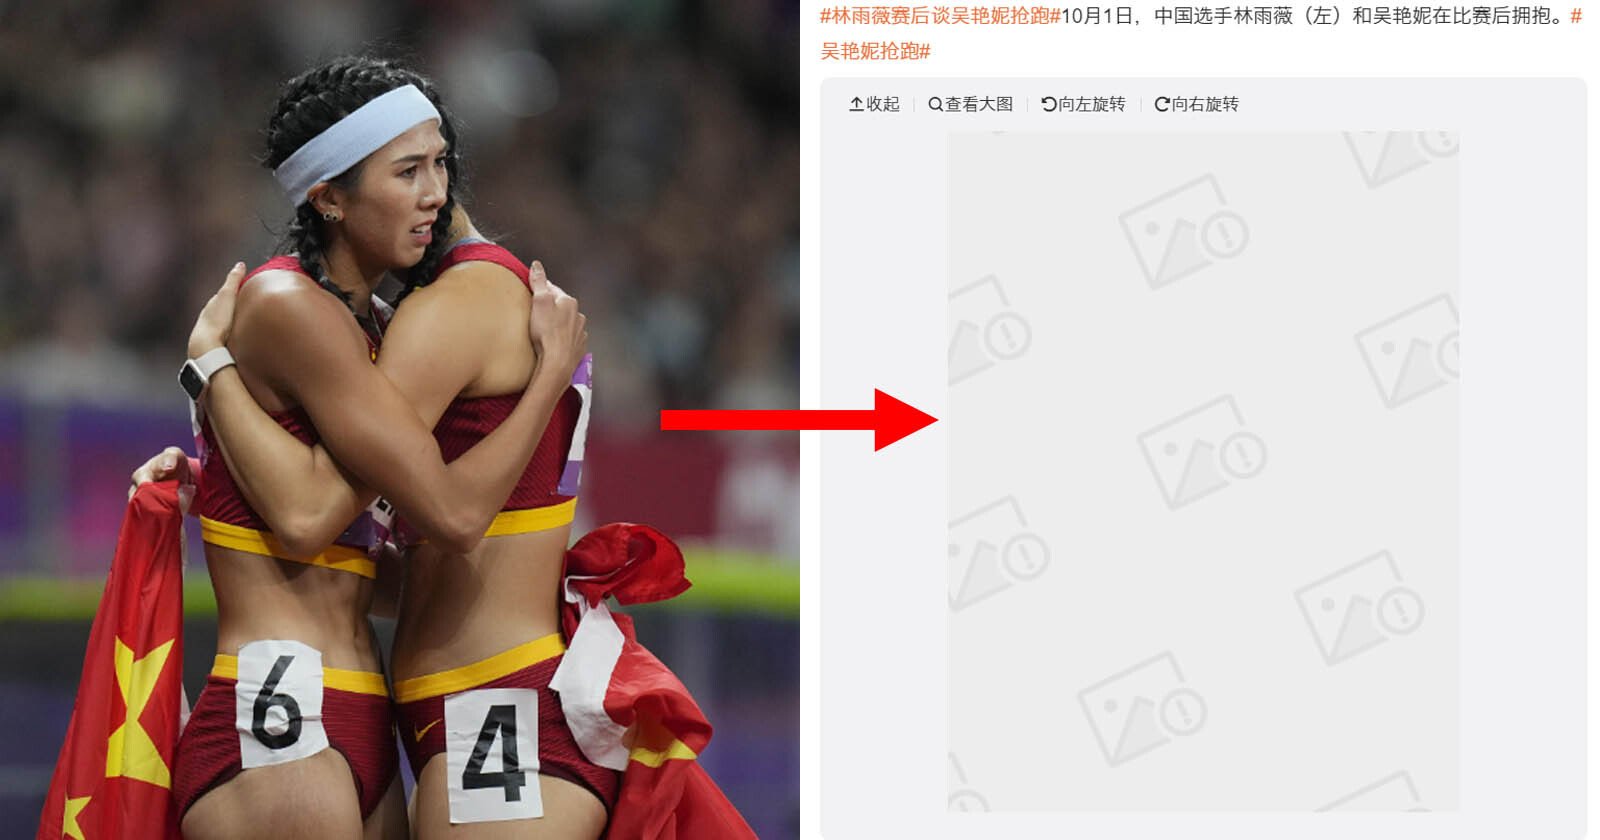 China Censors Sports Photo Because of Accidental Tinanamen Square Reference